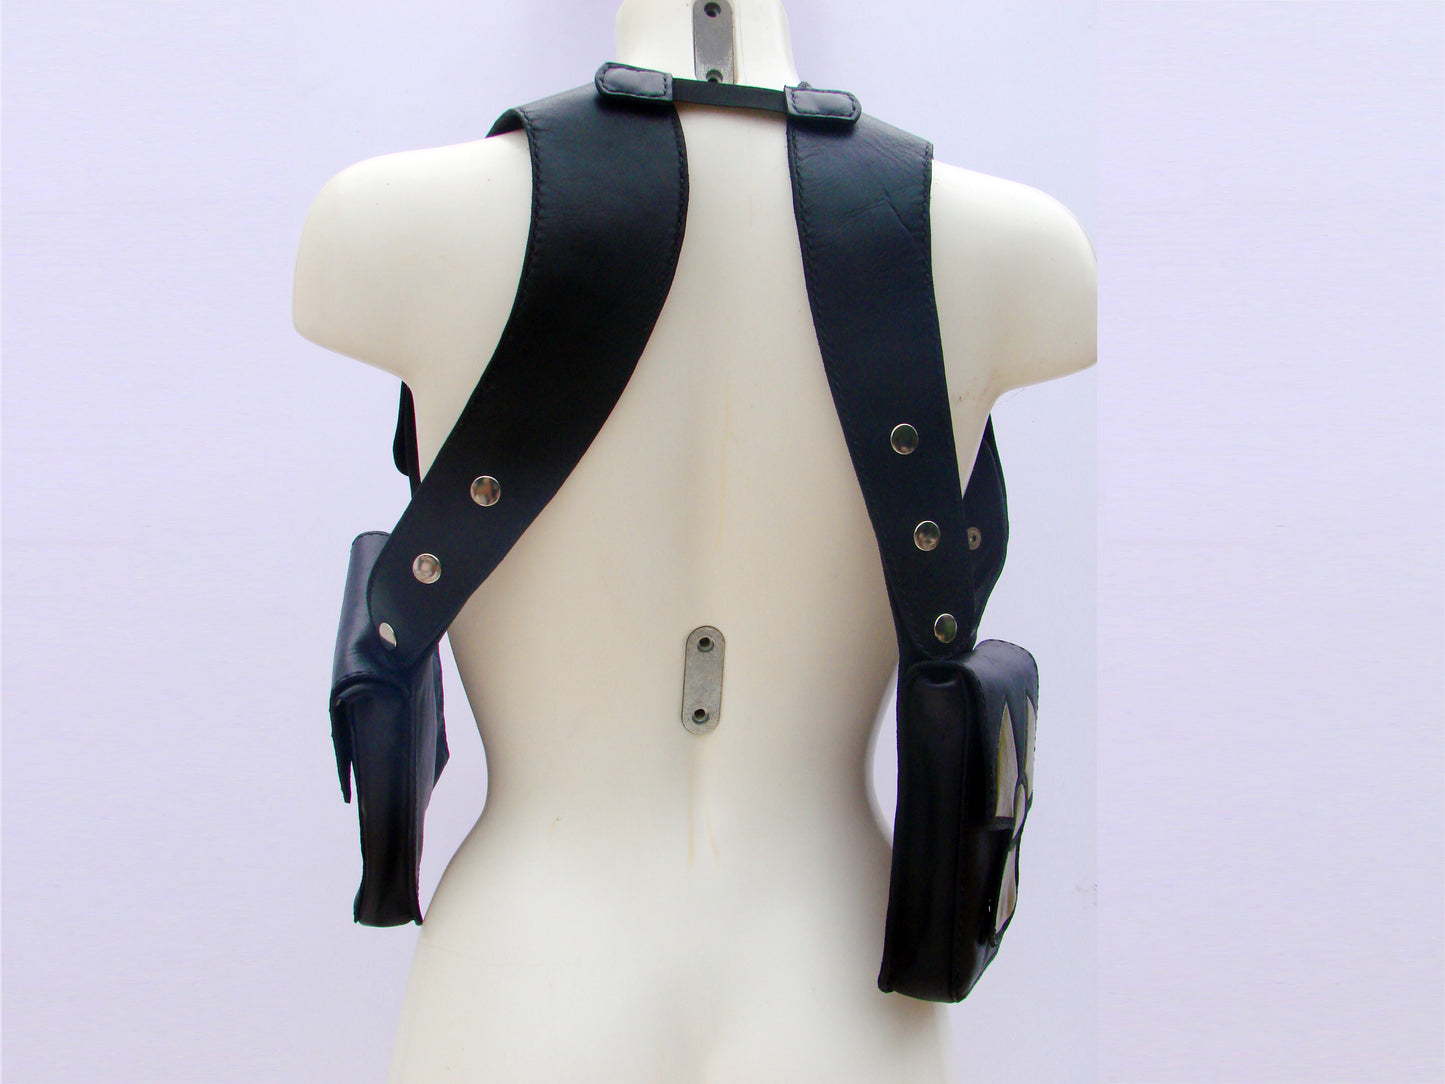 Rock & Rave in style with our leather double shoulder holster bag hand tooled radioactive symbol